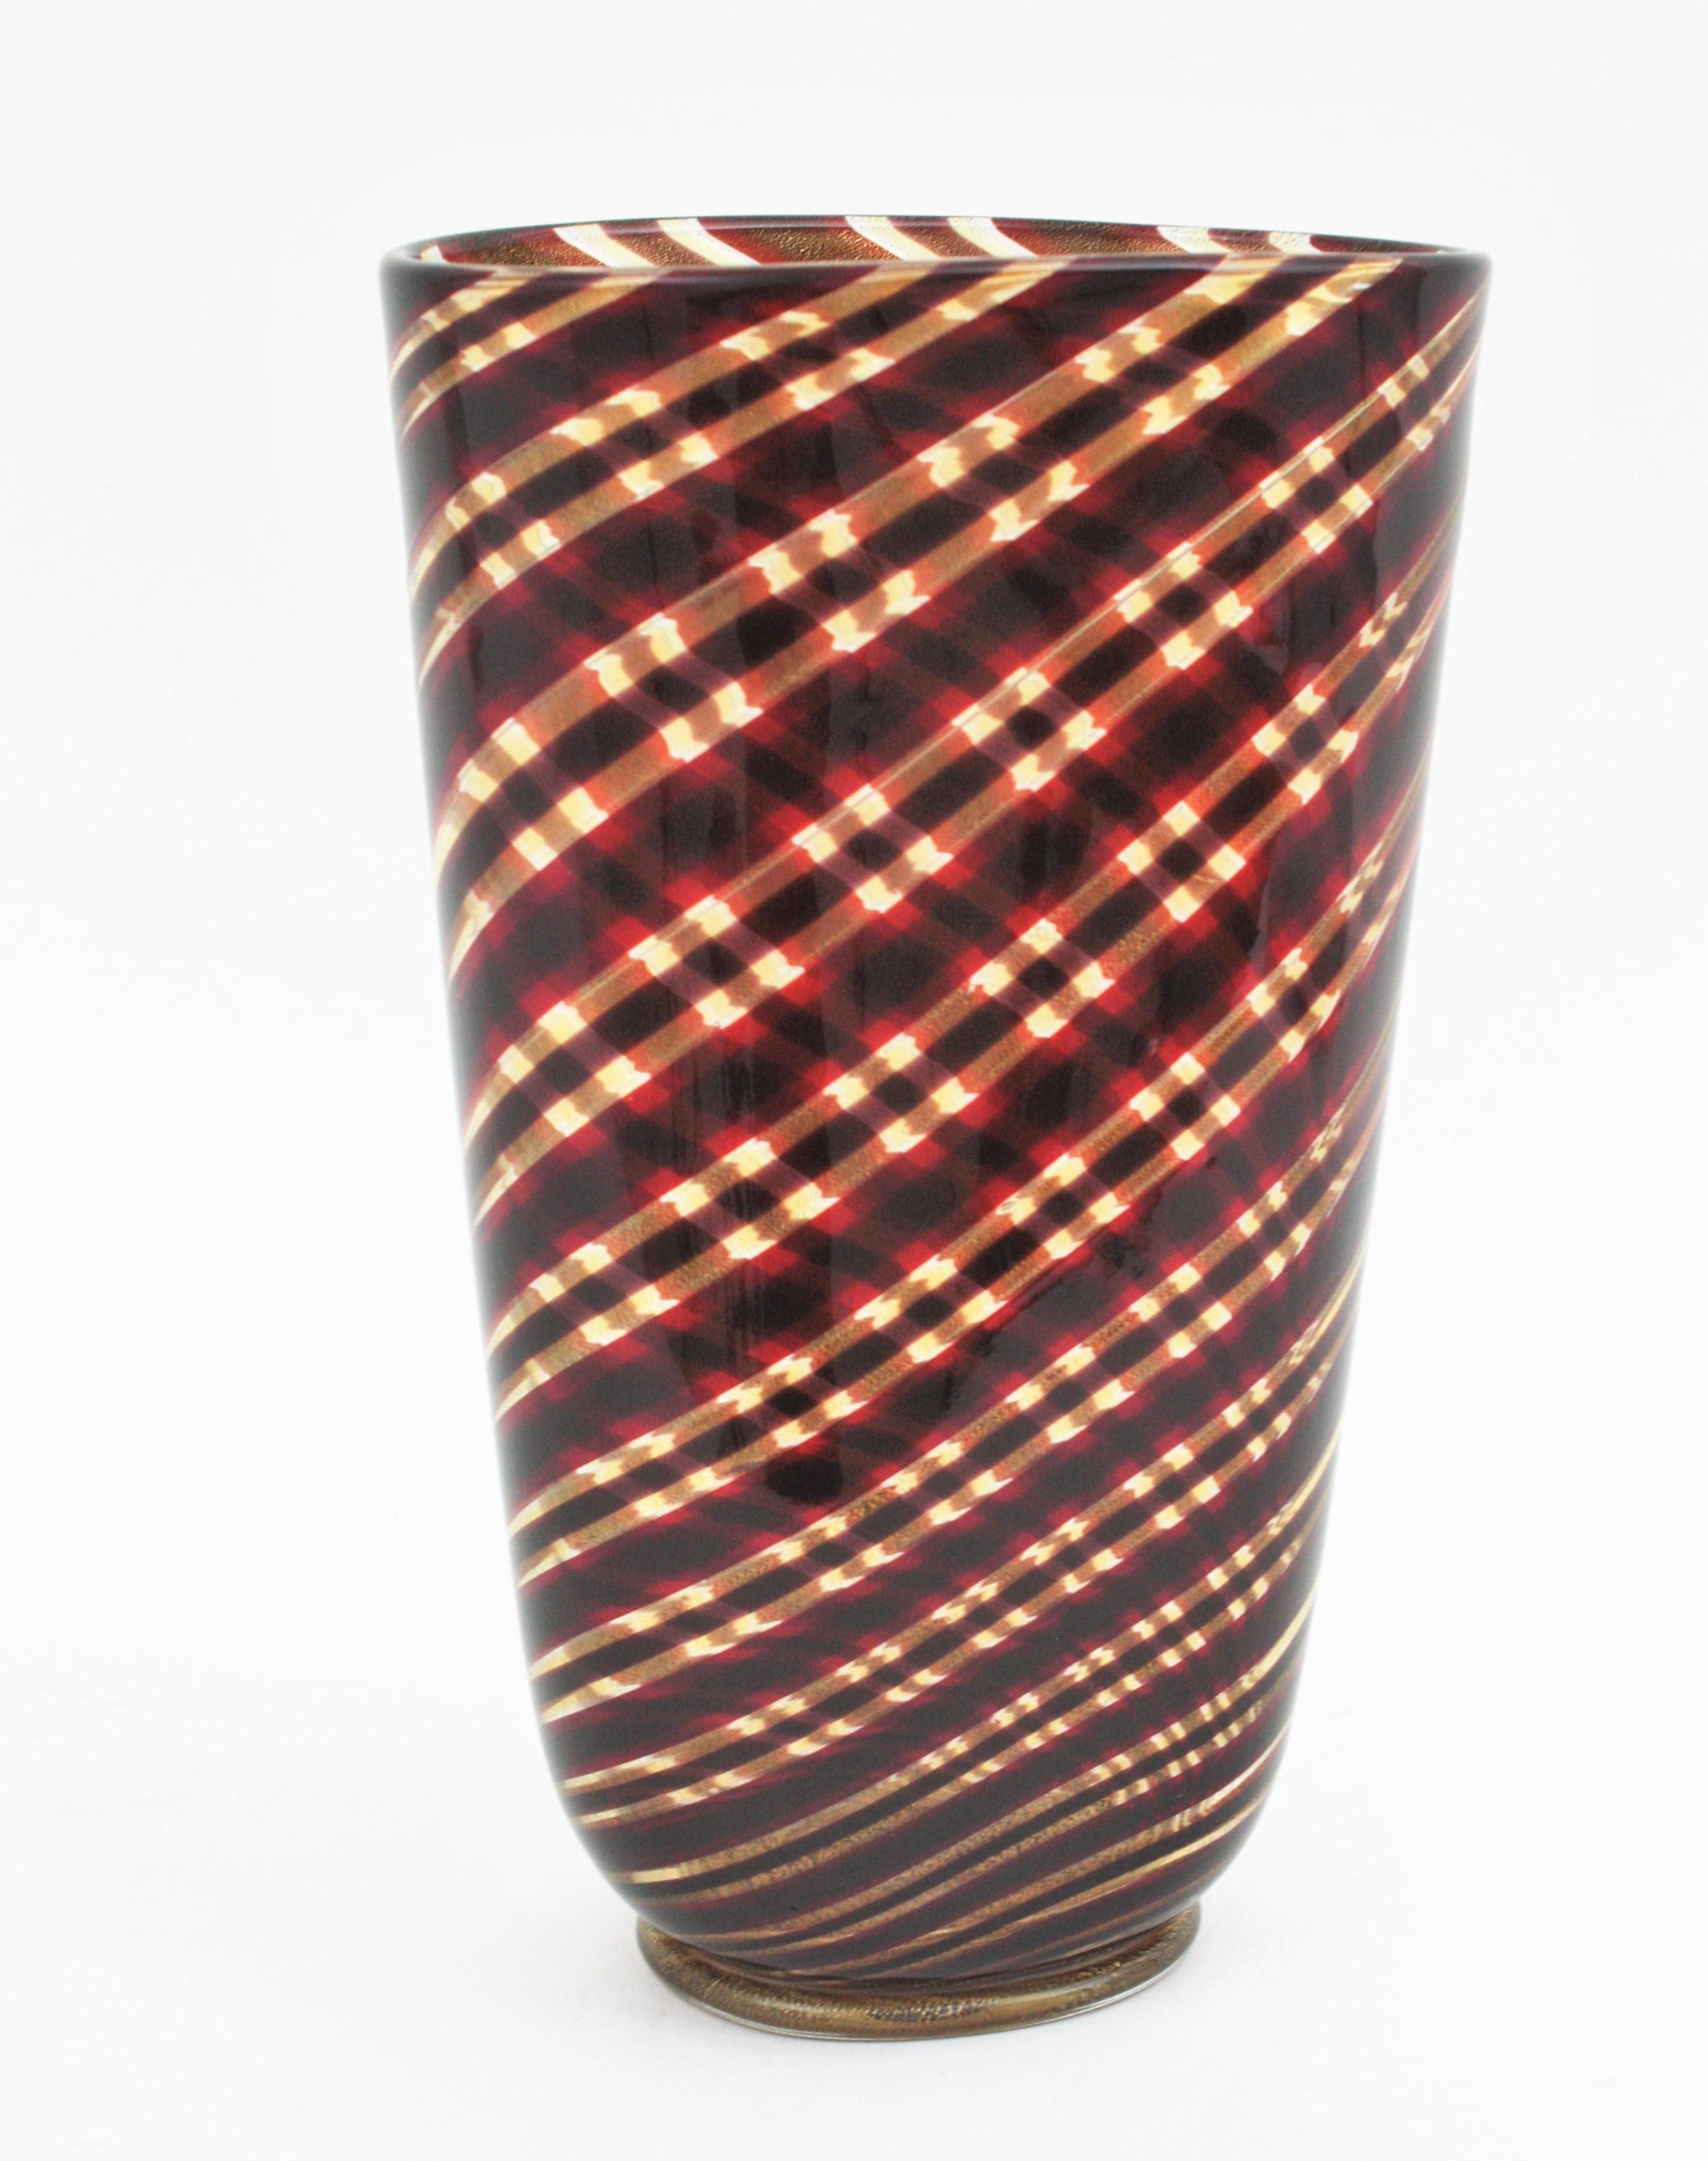 Murano Art Glass 'Spira Aurata Striato Vase' by Ercole Barovier, Barovier e Toso, Italy, 1966.
Spira Aurata series oval-section conical vase in blown glass with polychrome garnet, red and golden spiral striped decoration with gold dust. Applied